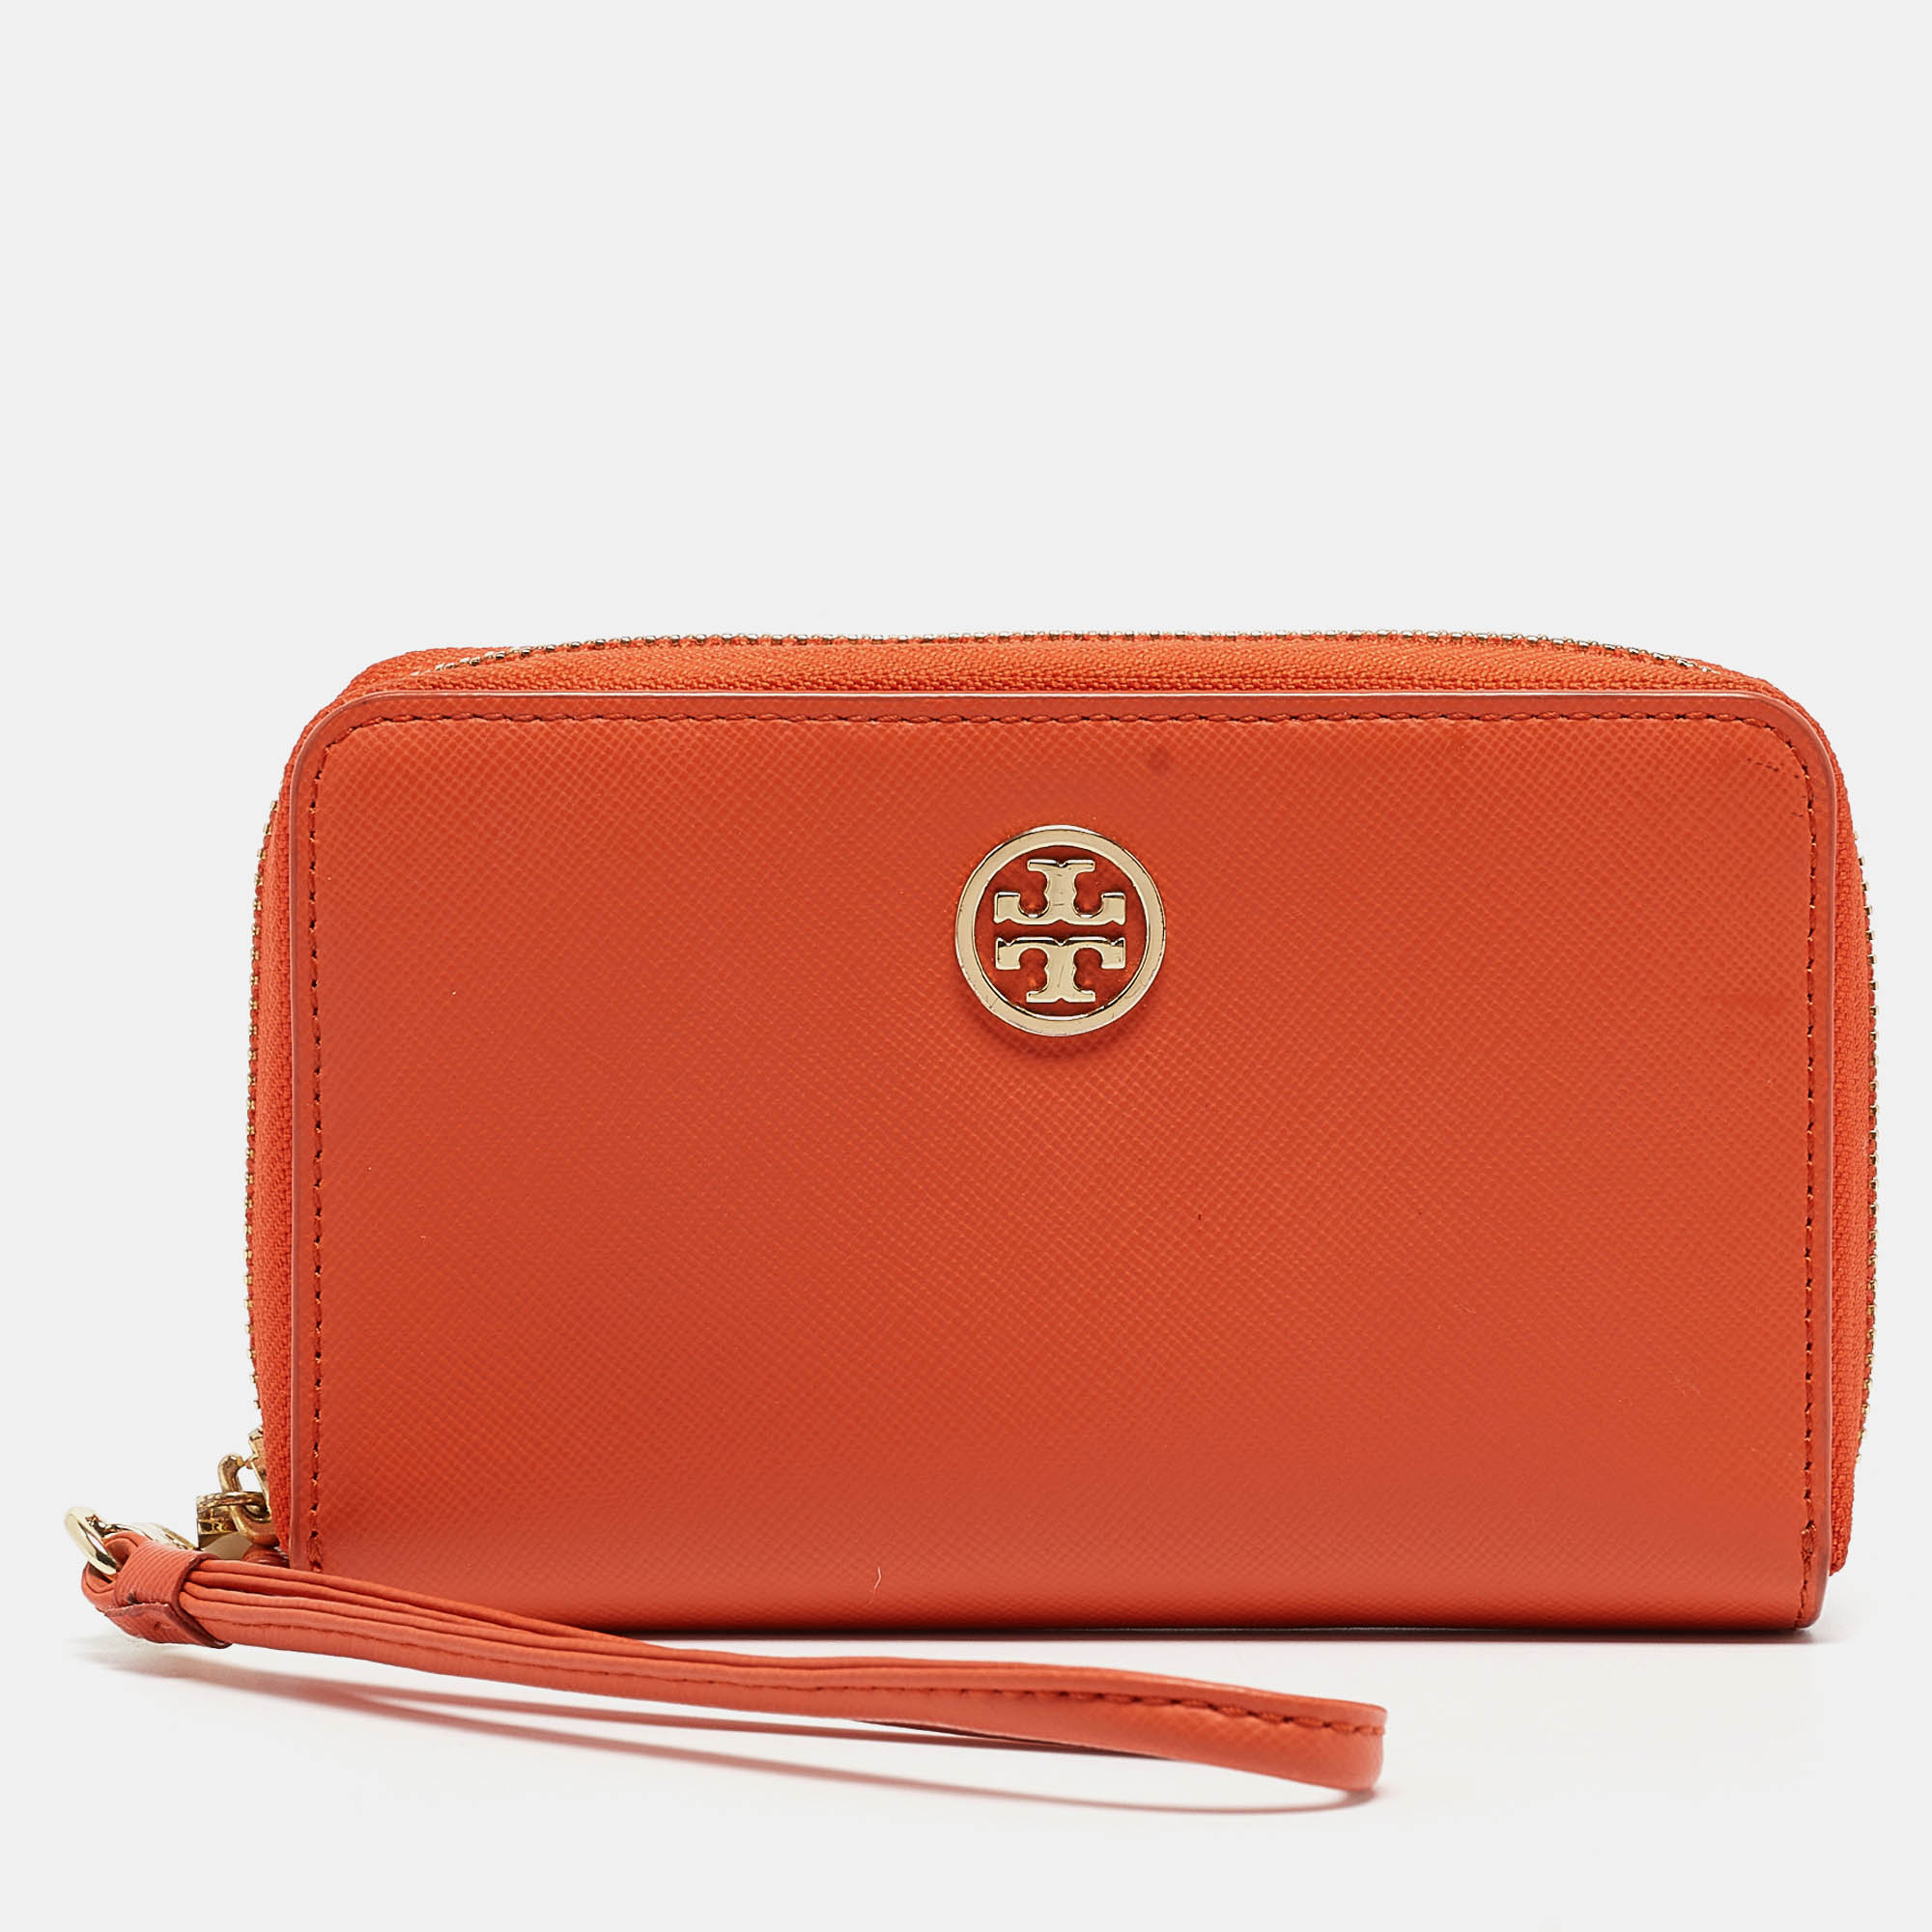 Pre-owned Tory Burch Orange Leather Robinson Zip Around Wristlet Wallet